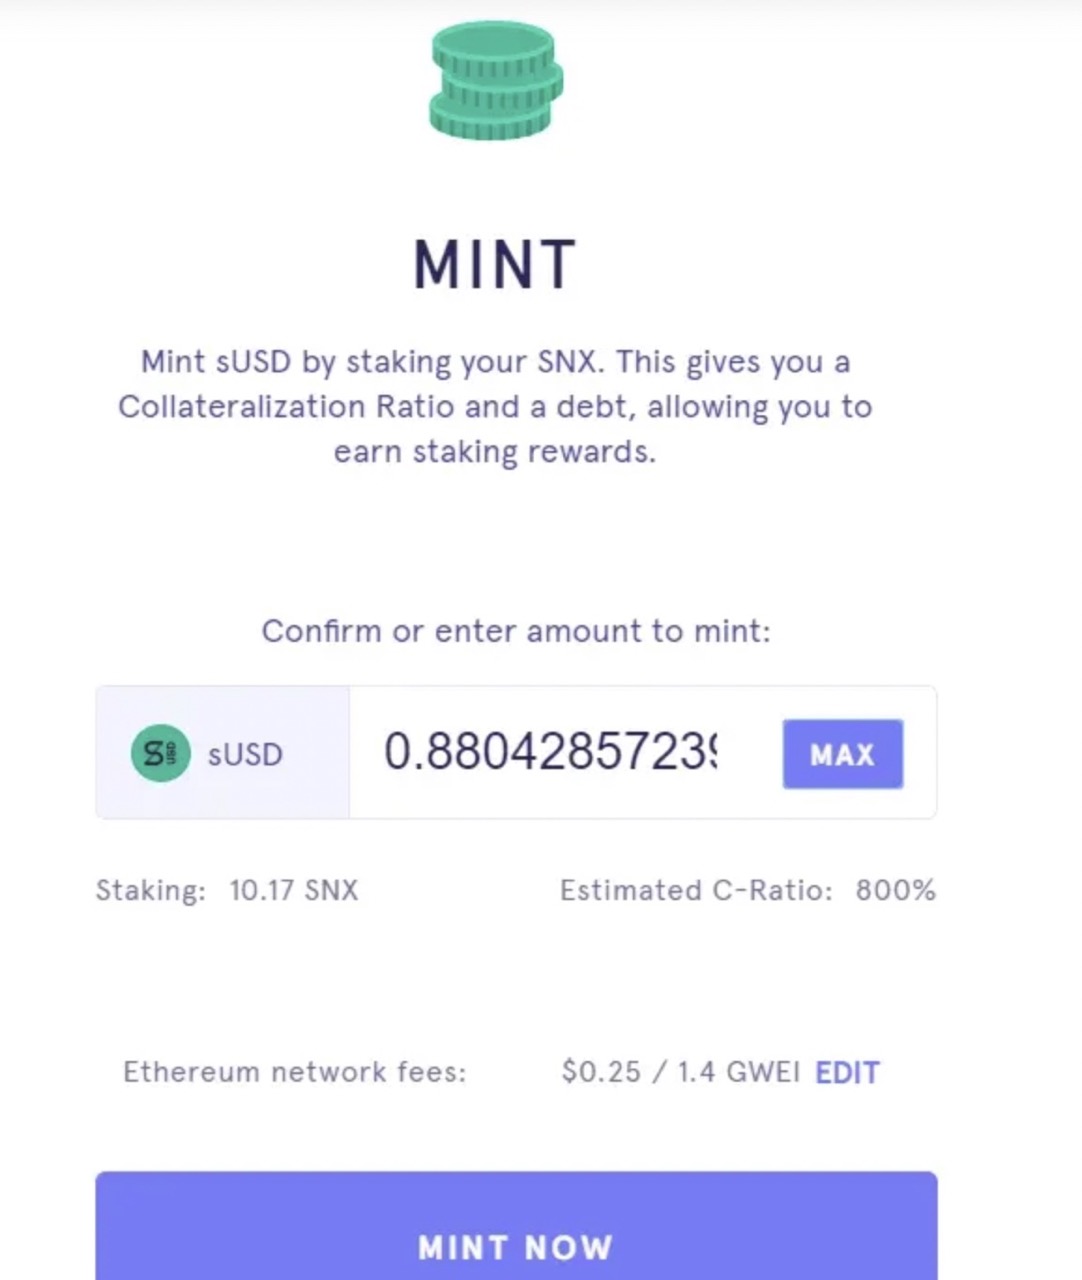 Staking SNX on Mintr wallet